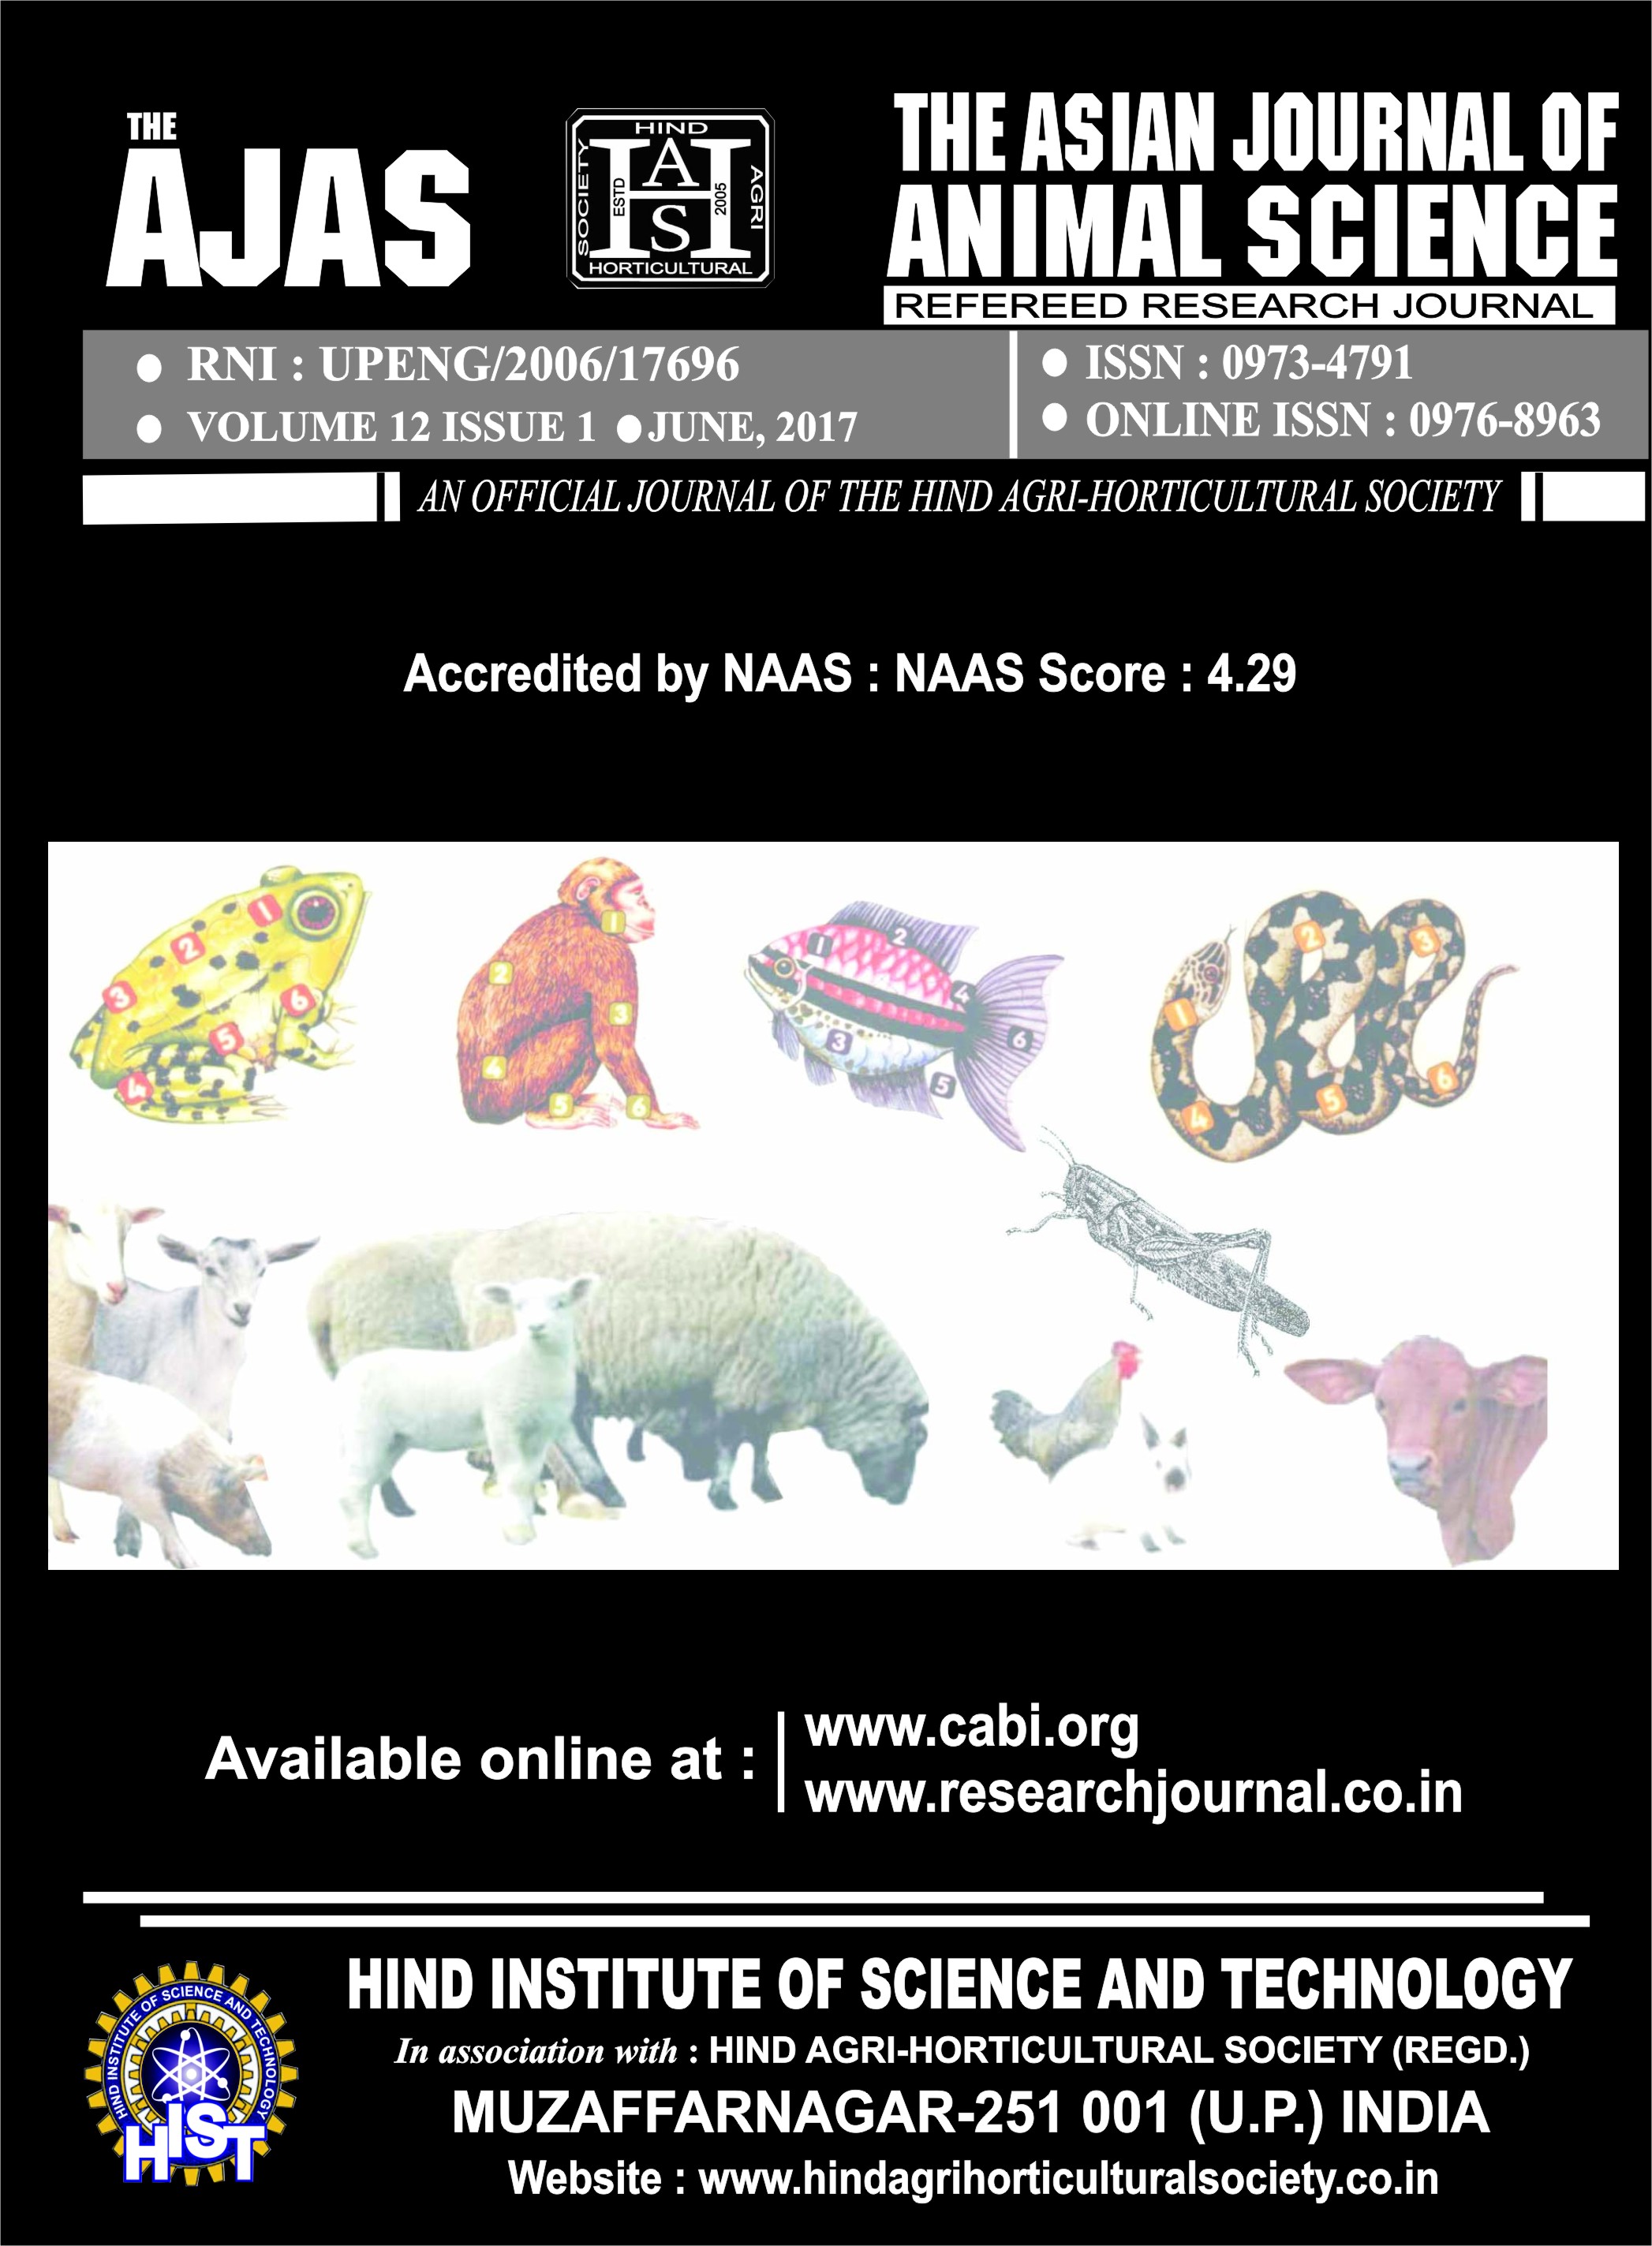 The Asian Journal of Animal Science